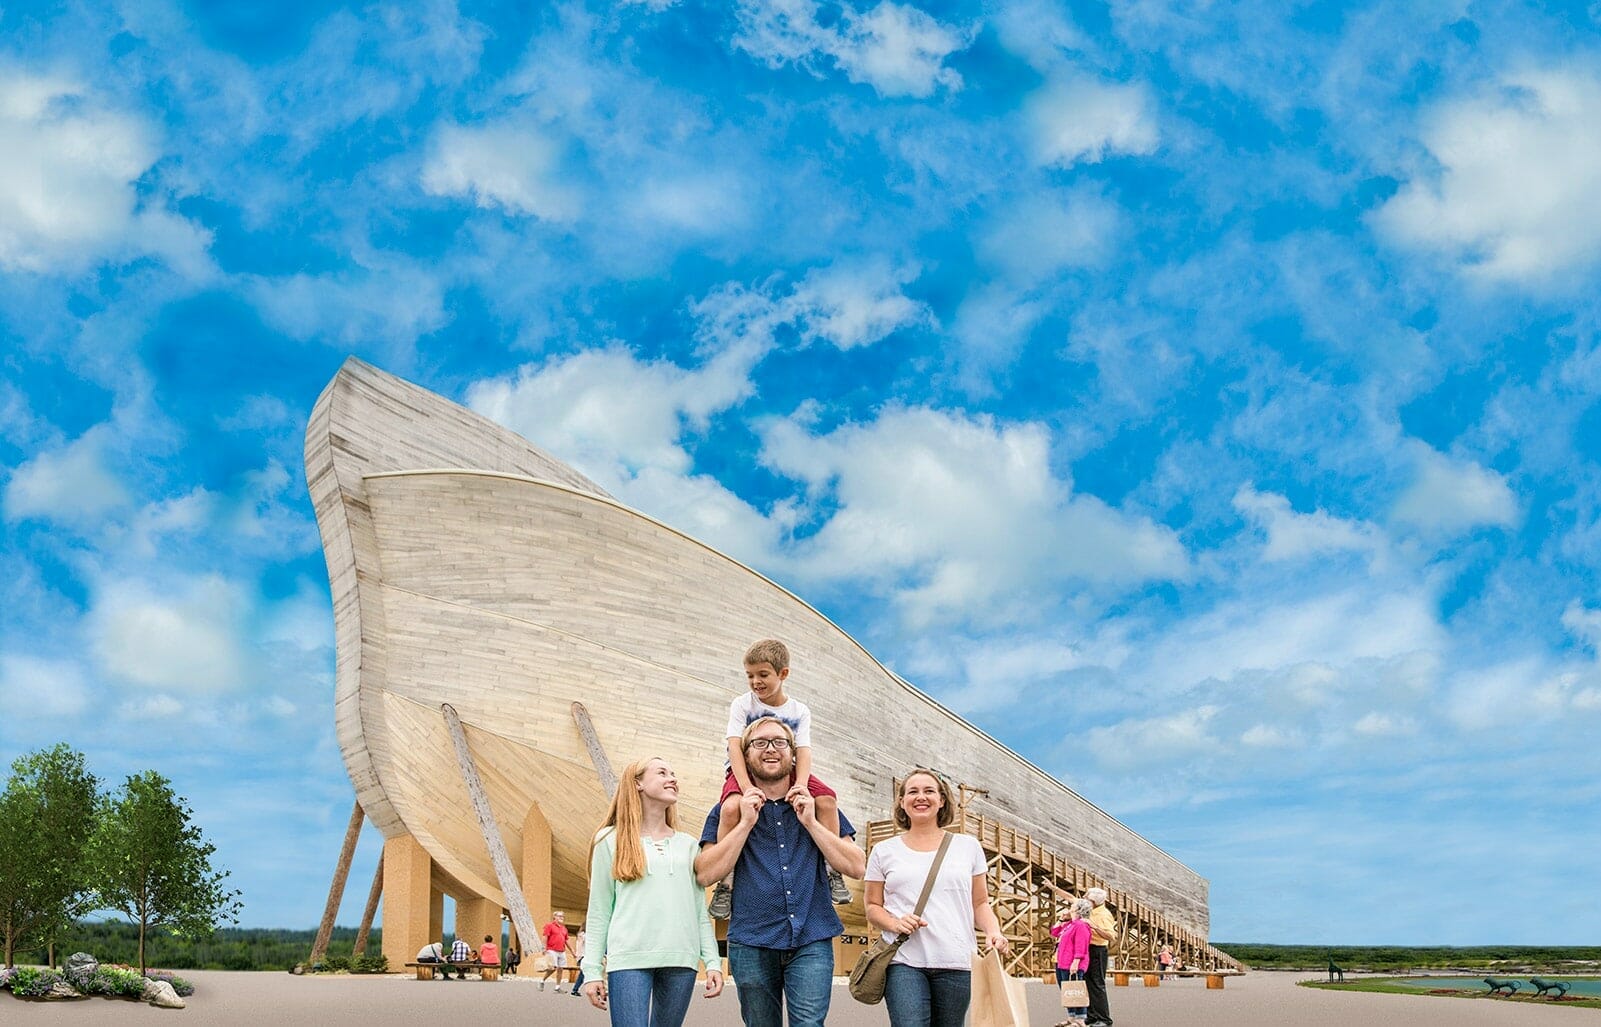 The Ark museum outside